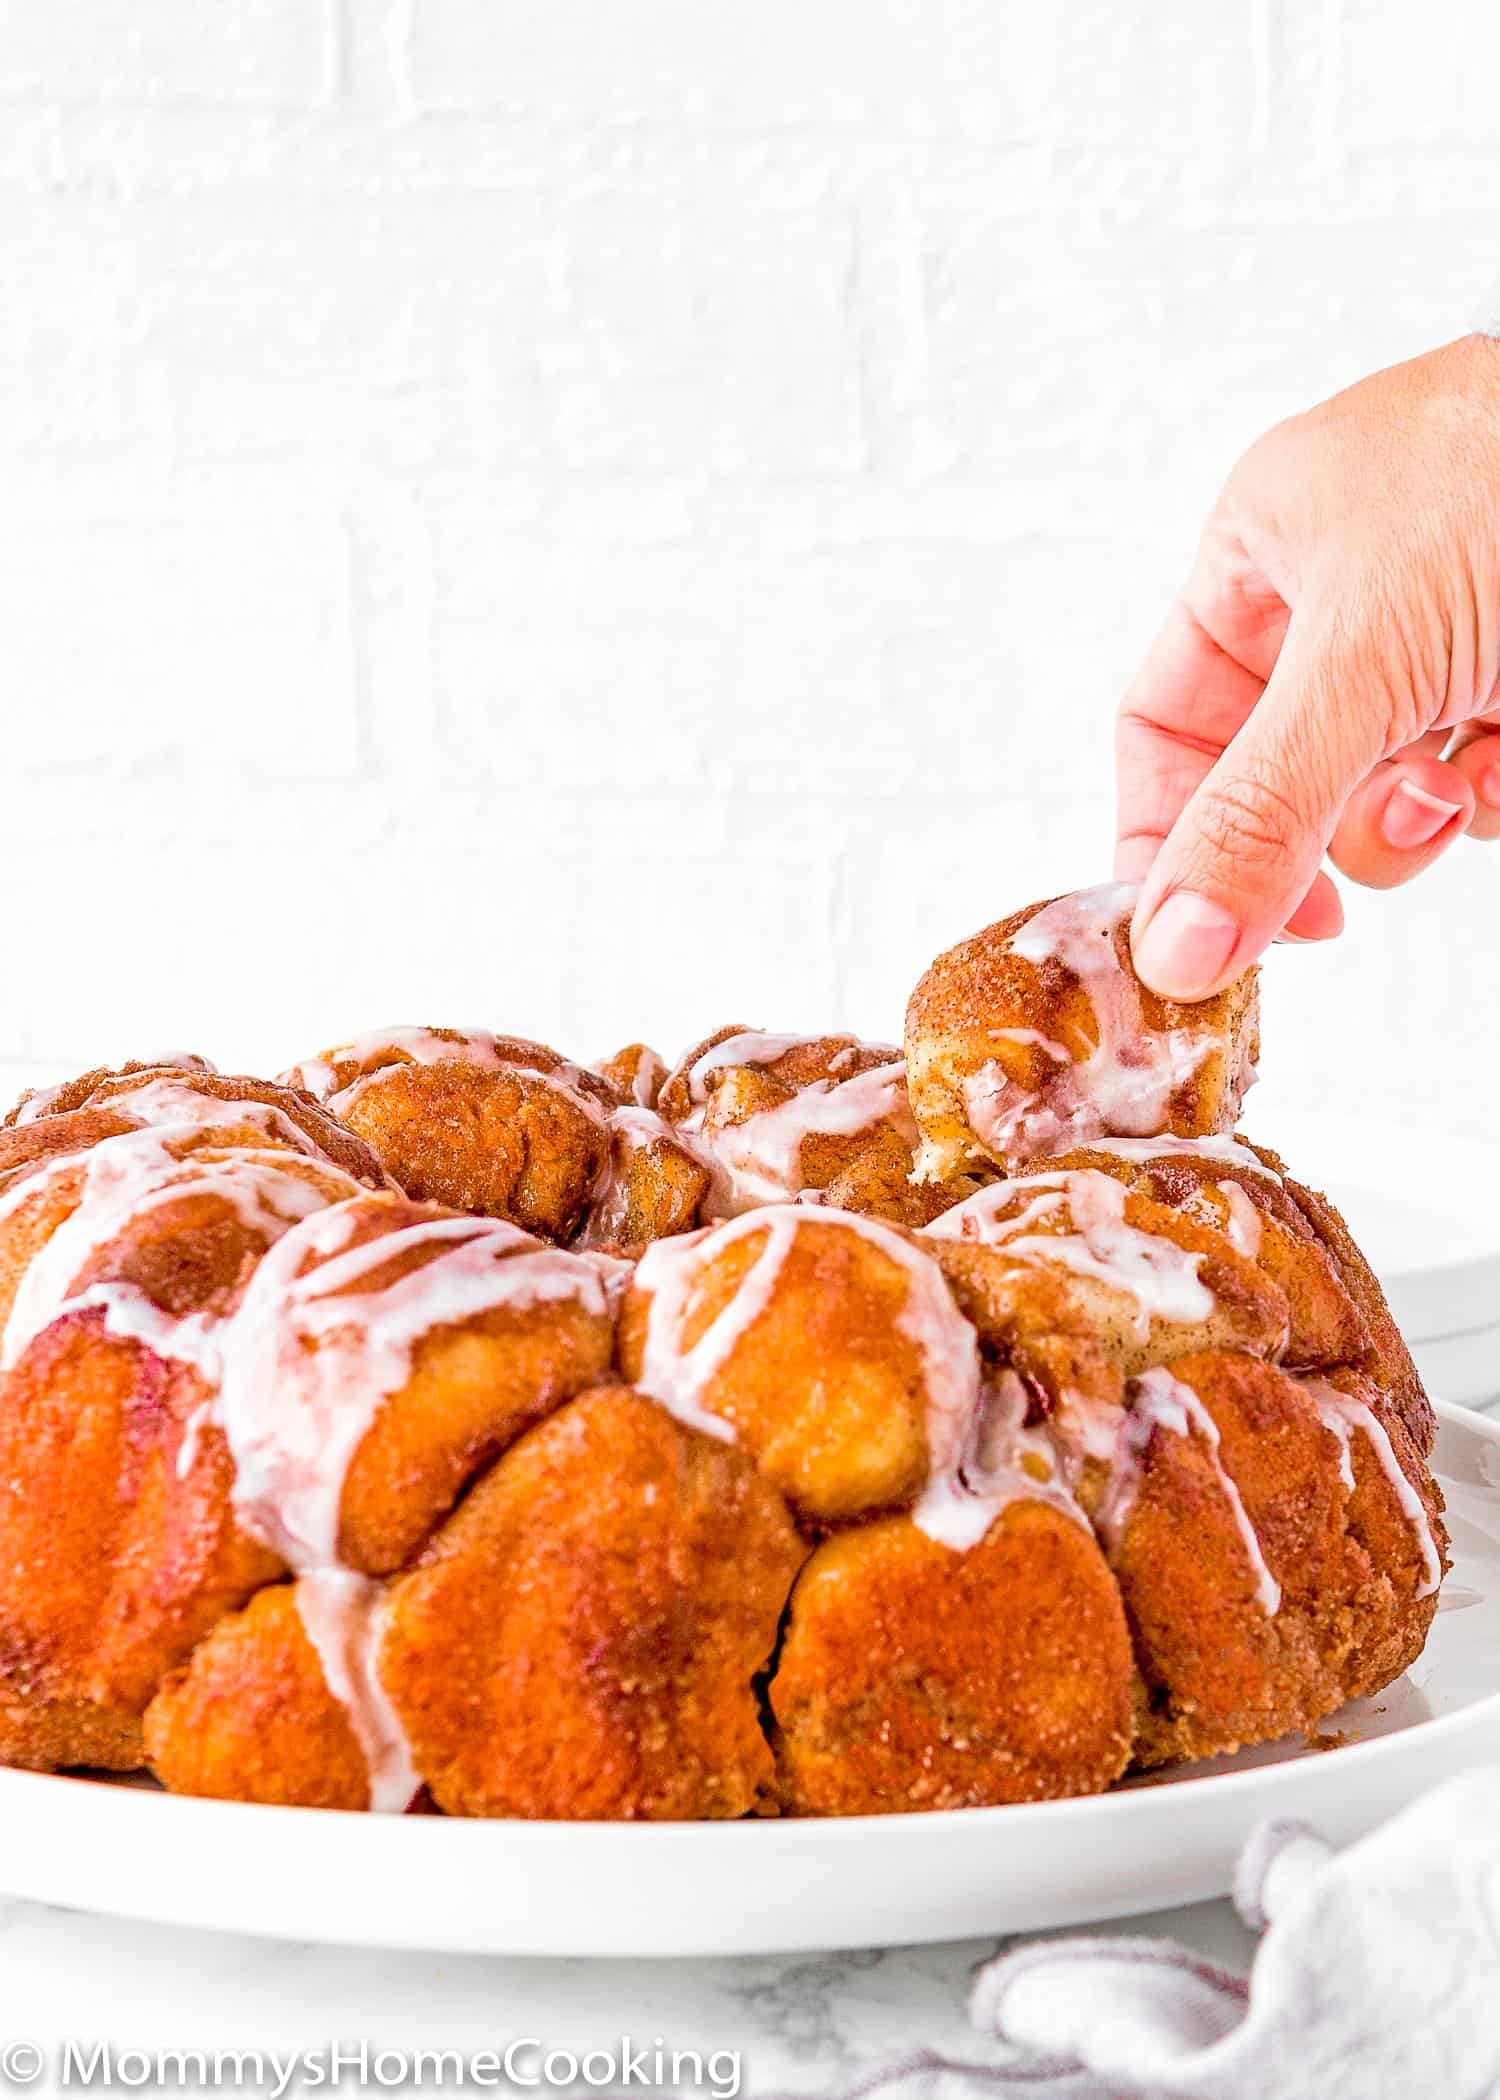 a hand tanking a piece of Homemade Eggless Monkey Bread.